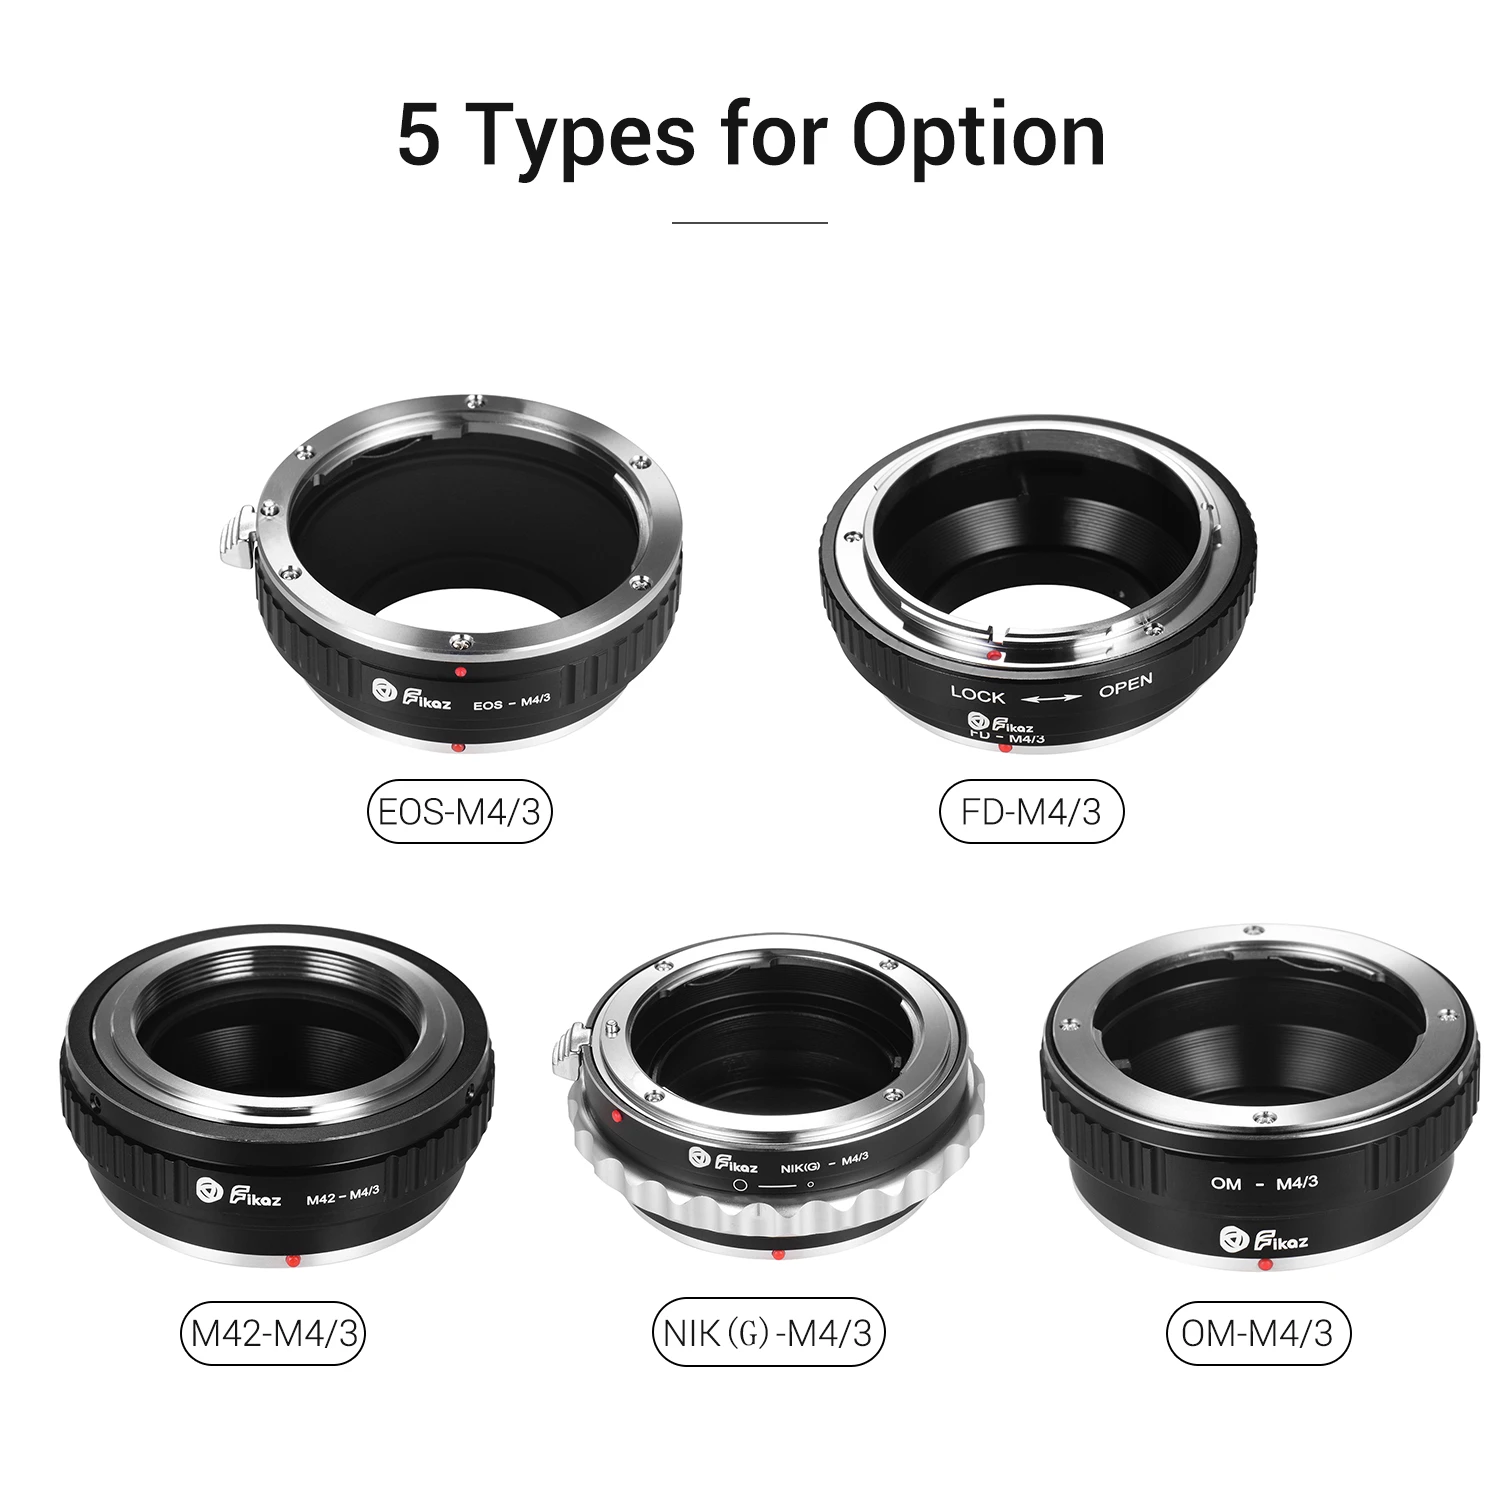 Fikaz OM M4/3/M42 M43/FD M43/EOS M43/Nikon(G) M43 Lens Mount Adapter Ring  Mount Lens to Olympus M4/3 Micro 4/3 Cameras Adapter|Lens Adapter| -  AliExpress